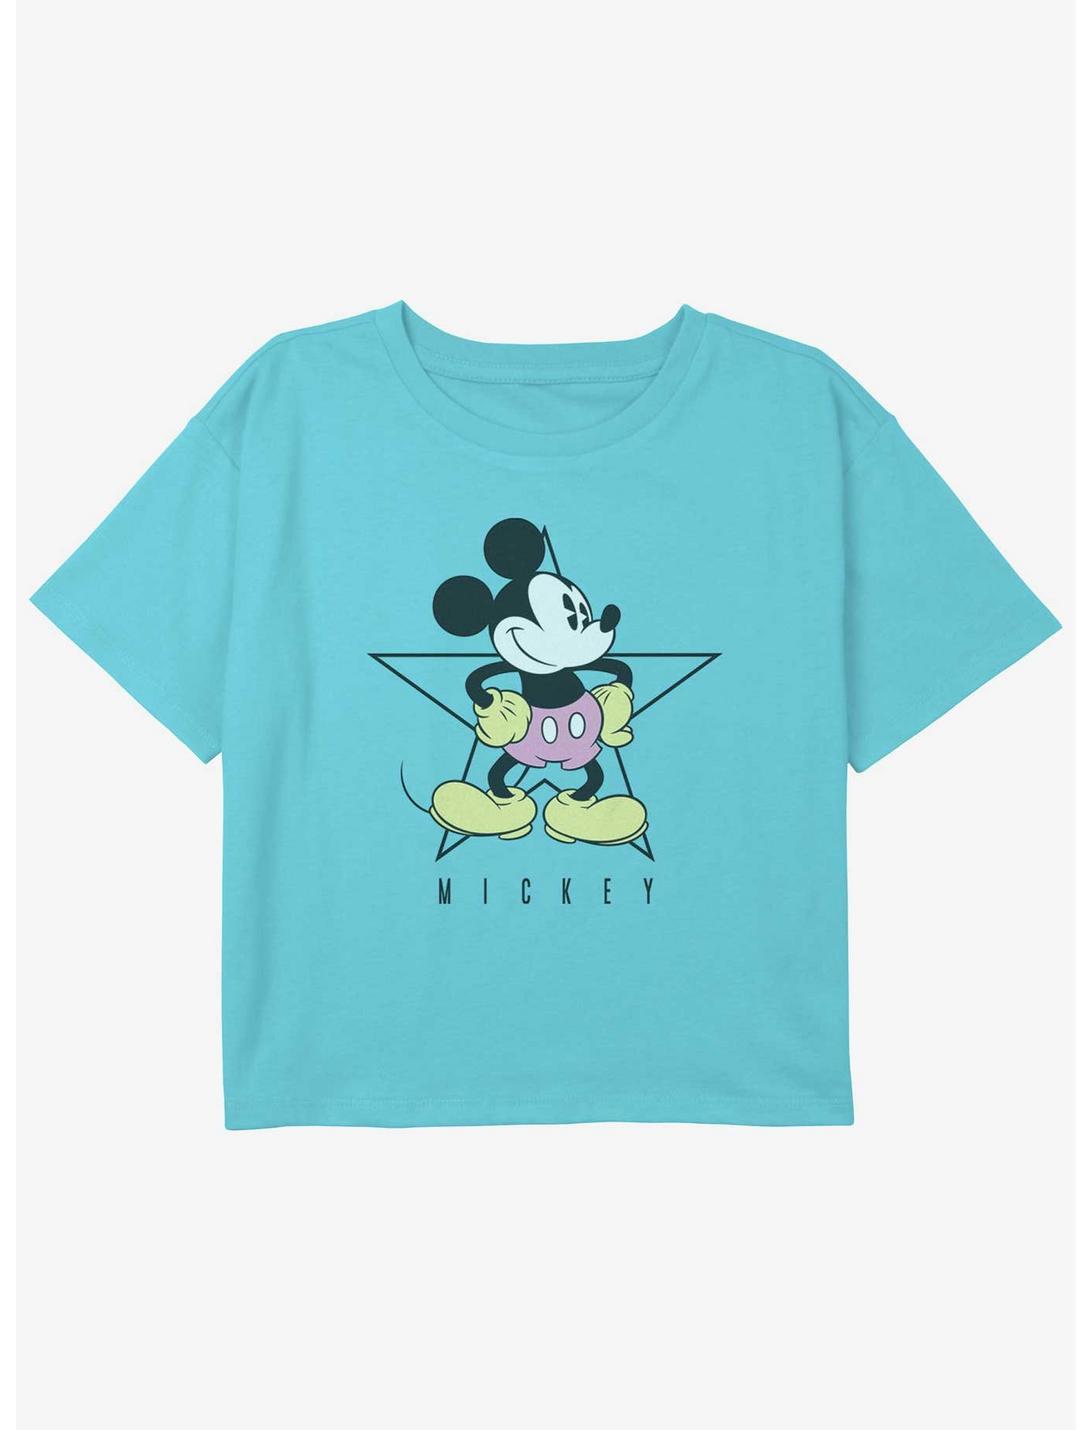 Disney Mickey Mouse Star Pose Girls Youth Crop T-Shirt, BLUE, hi-res